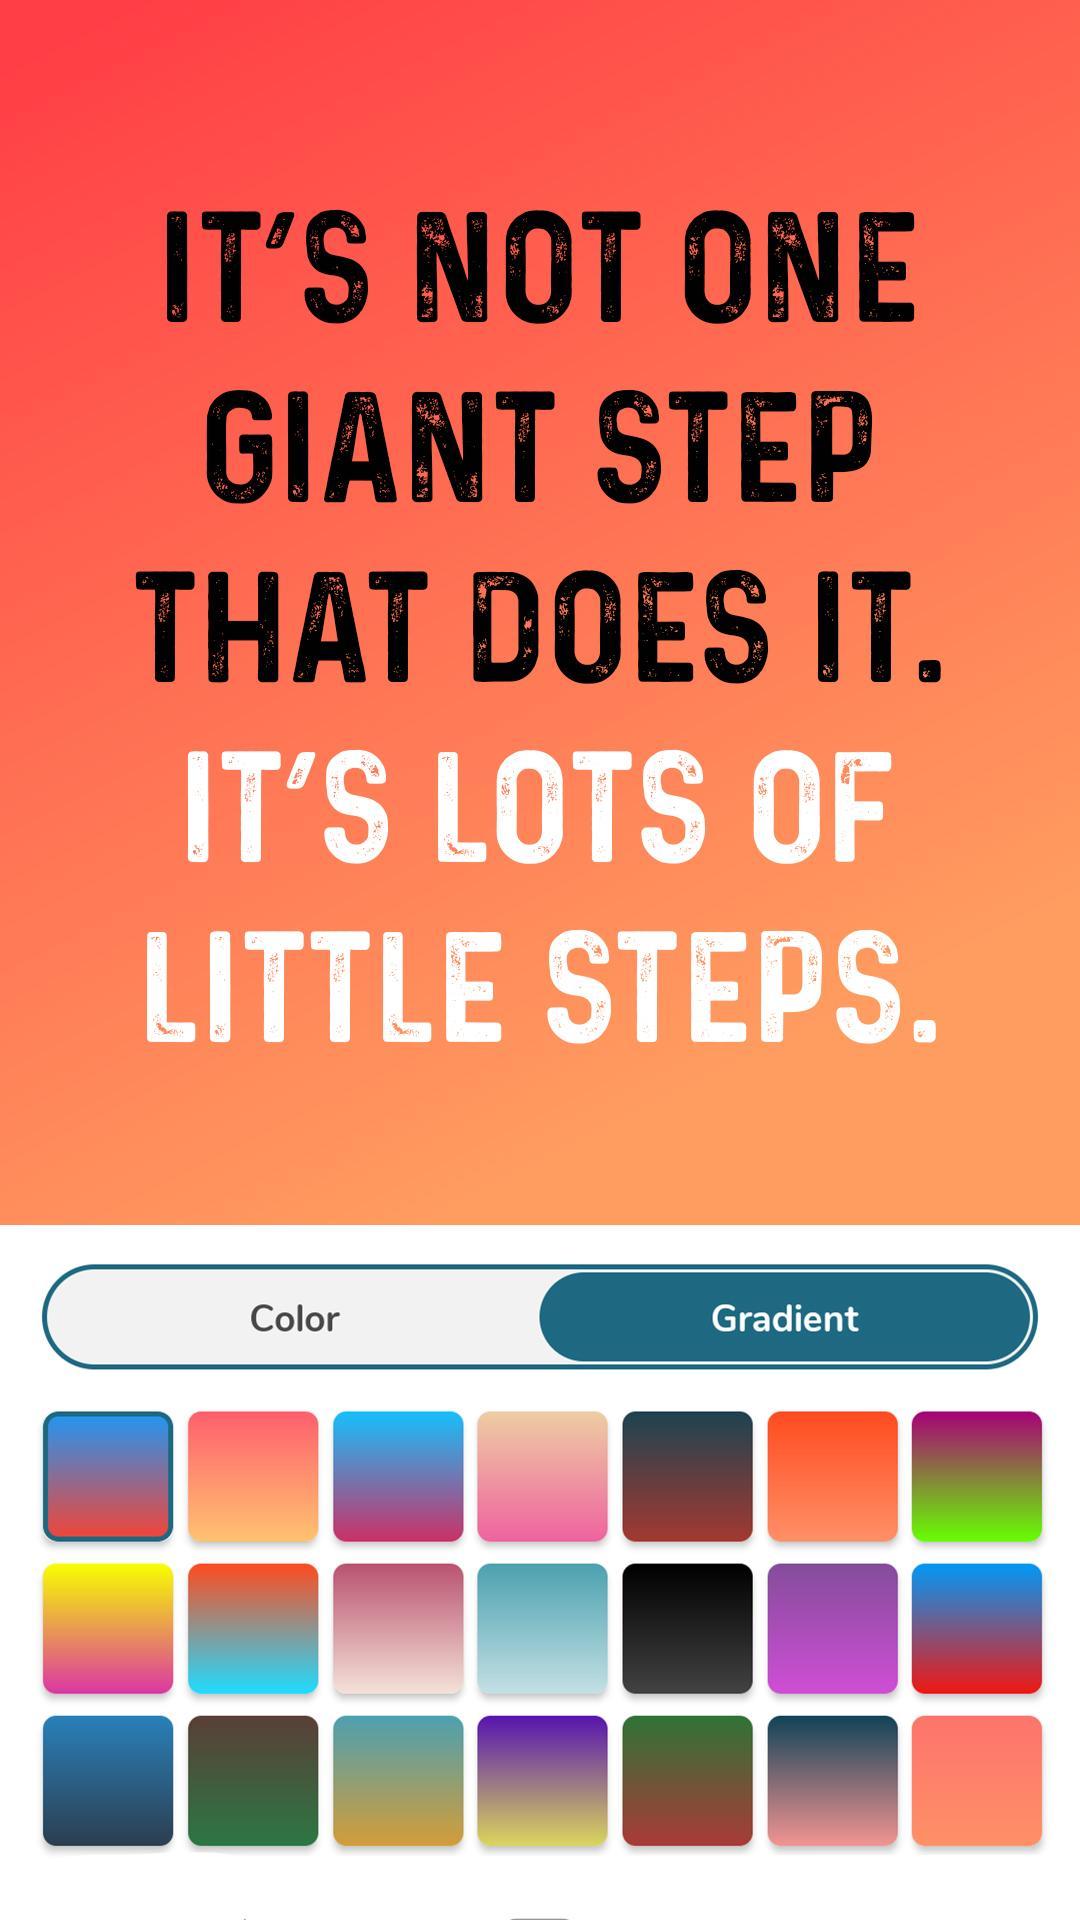 Quotes Creator for Android - APK Download